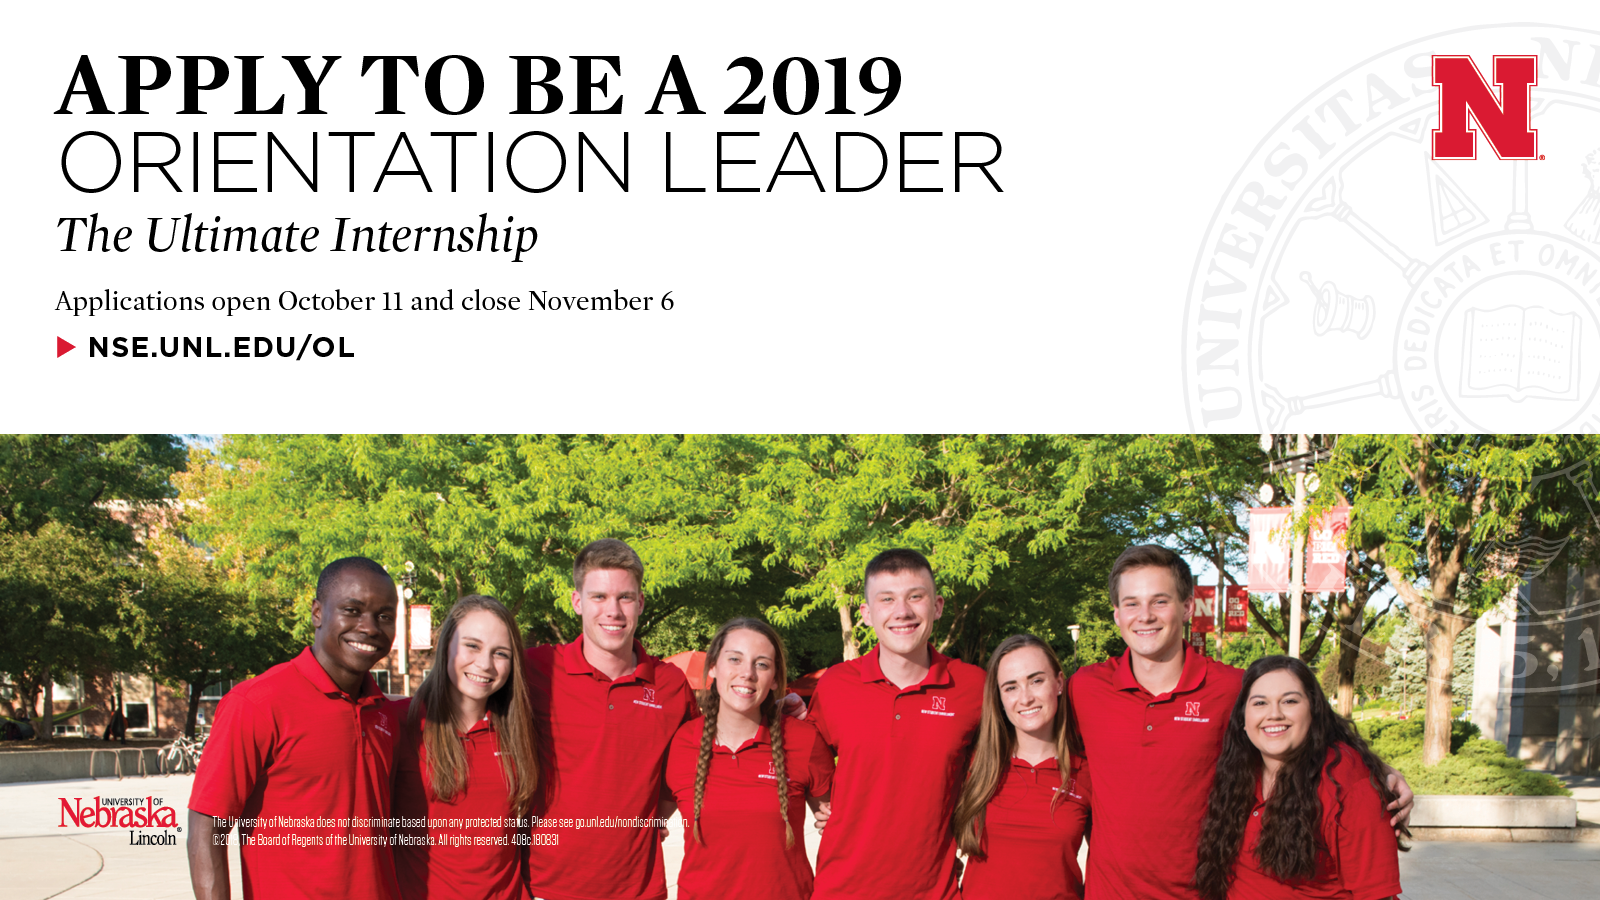 Apply to be a 2019 Orientation Leader